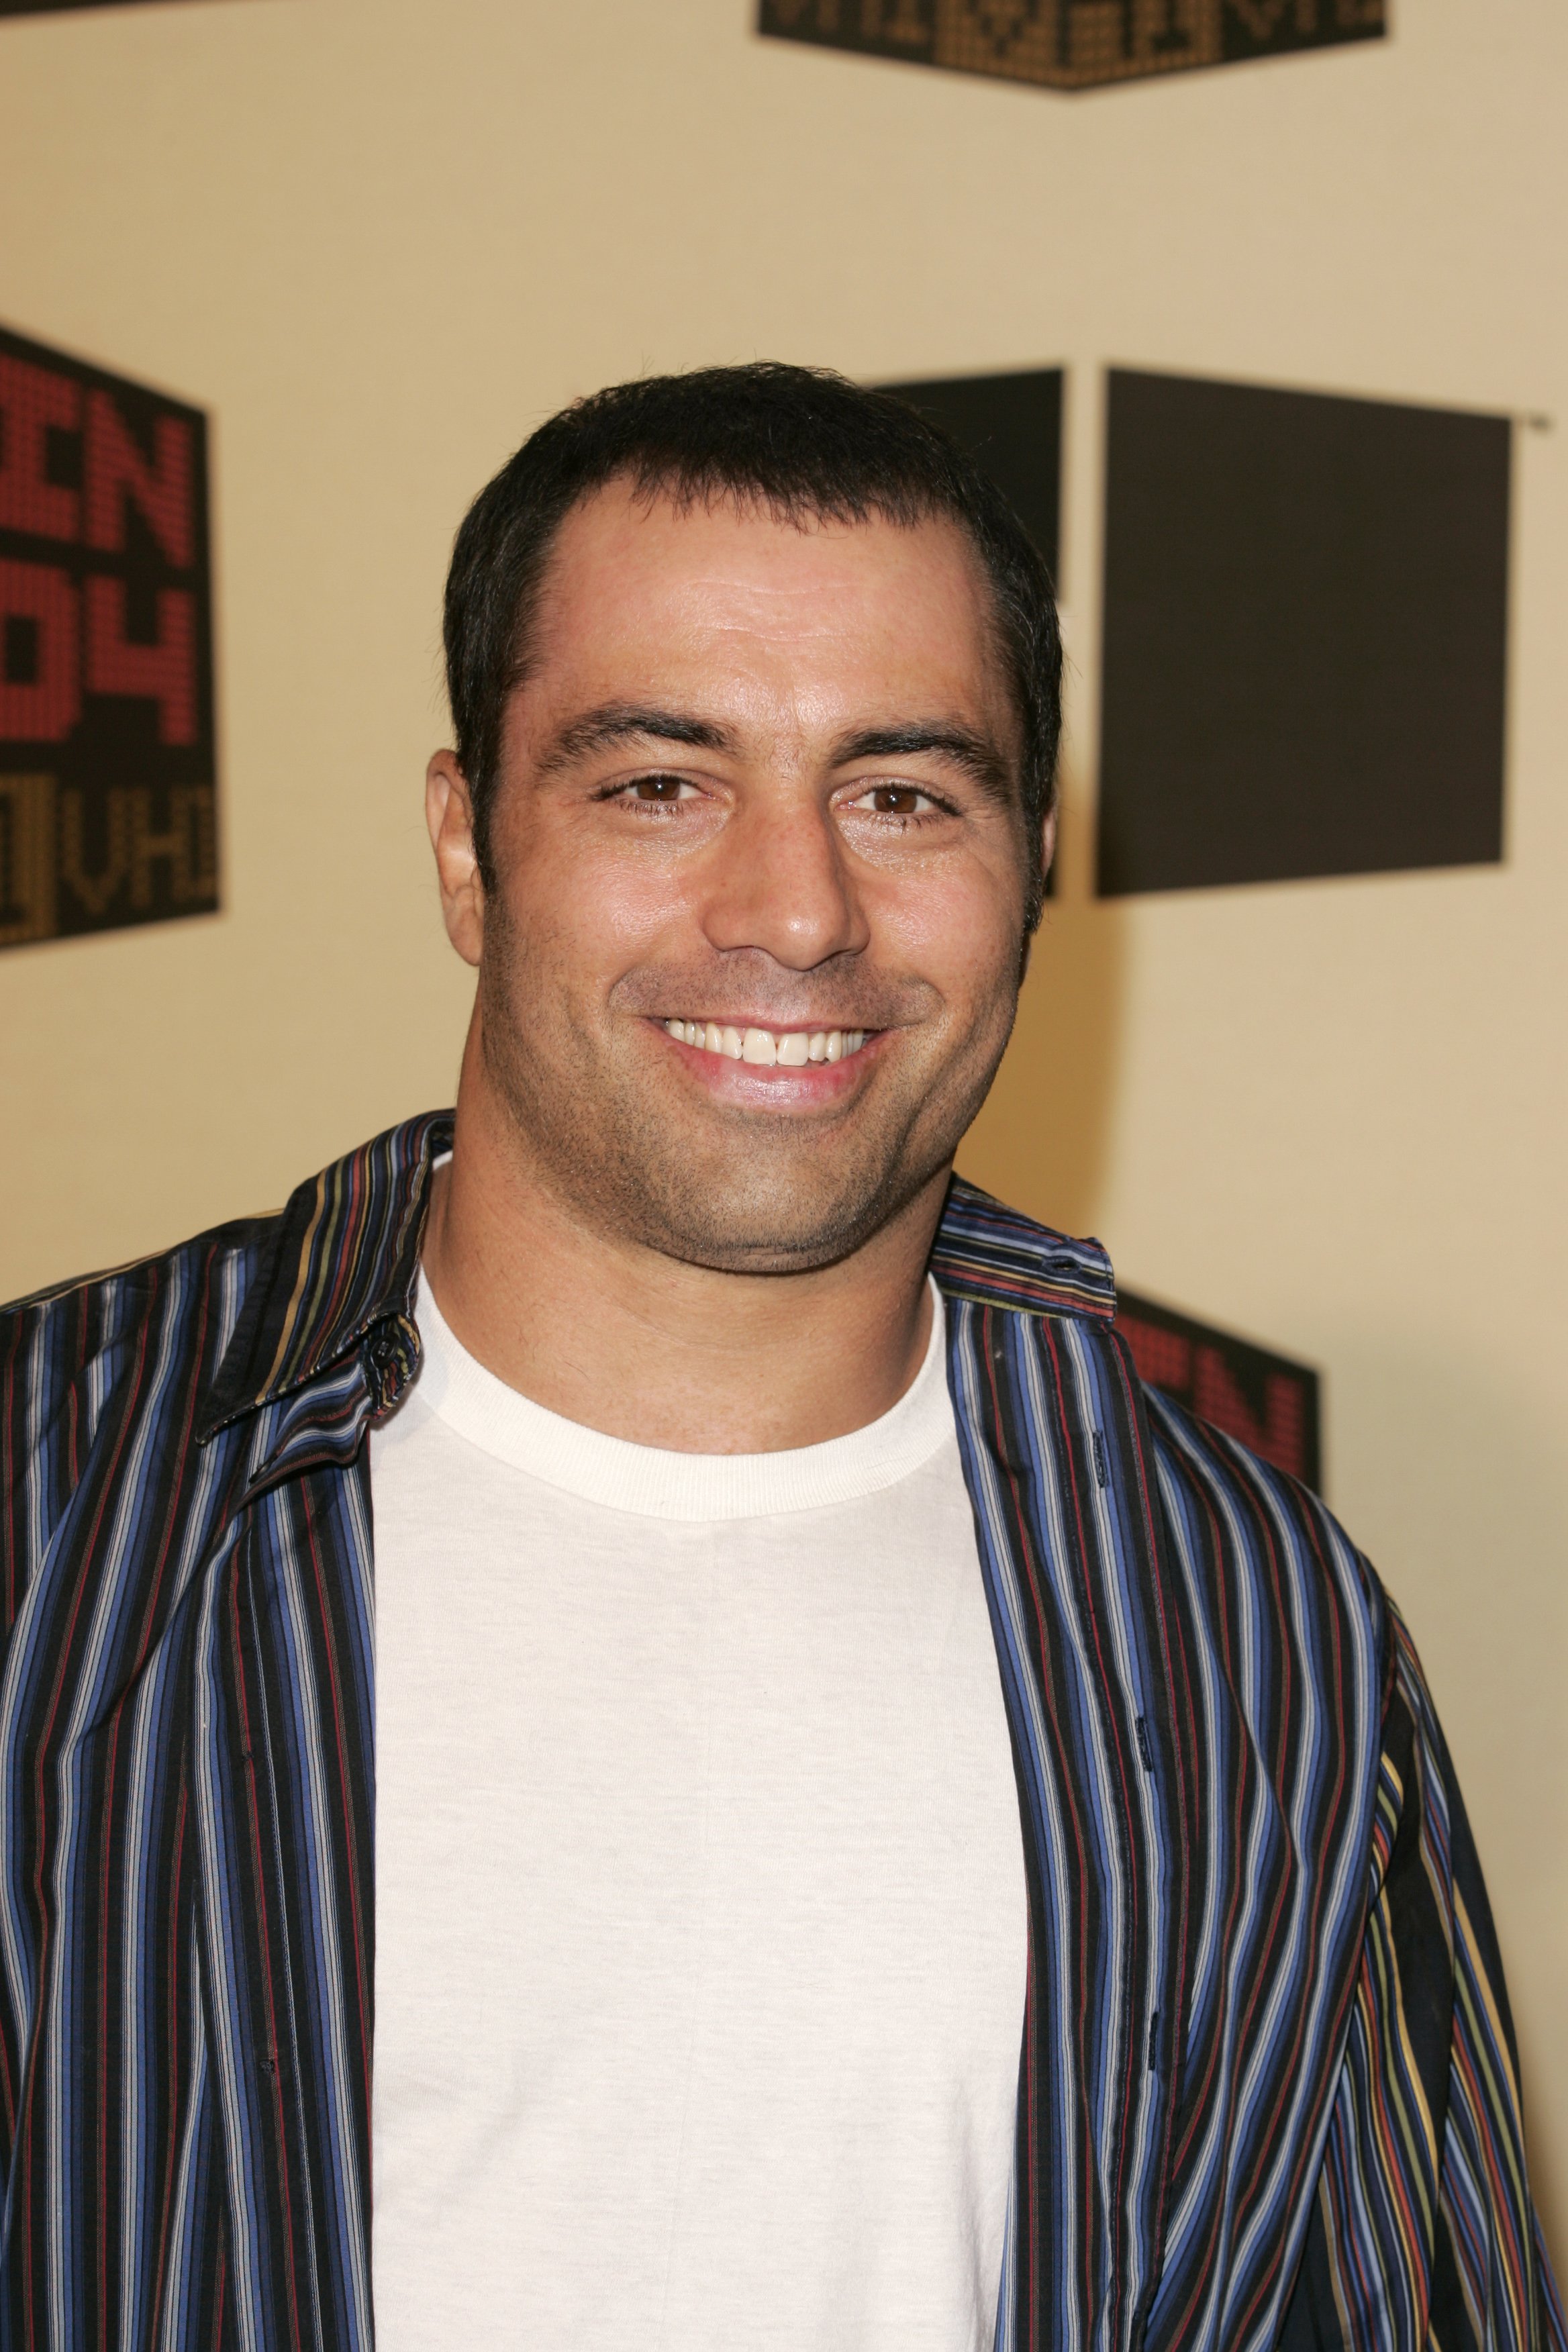 Joe Rogan arrives at the VH1 Big In 2004 Awards held at the Shrine Auditorium. | Source: Getty Images